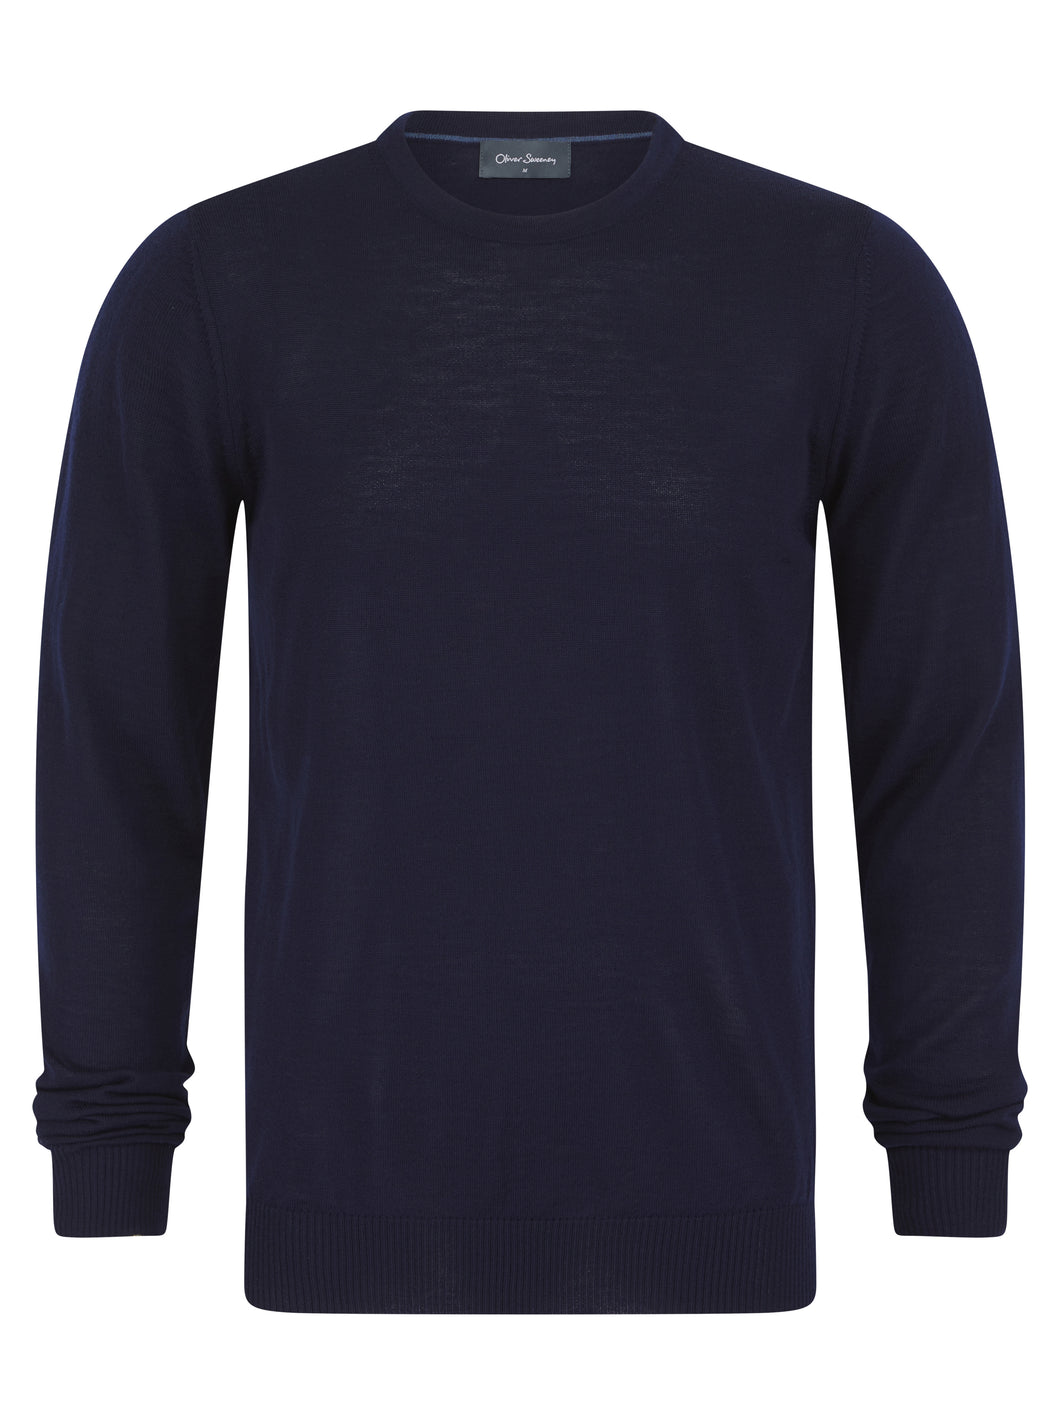 Oliver Sweeney Camber Knit Navy